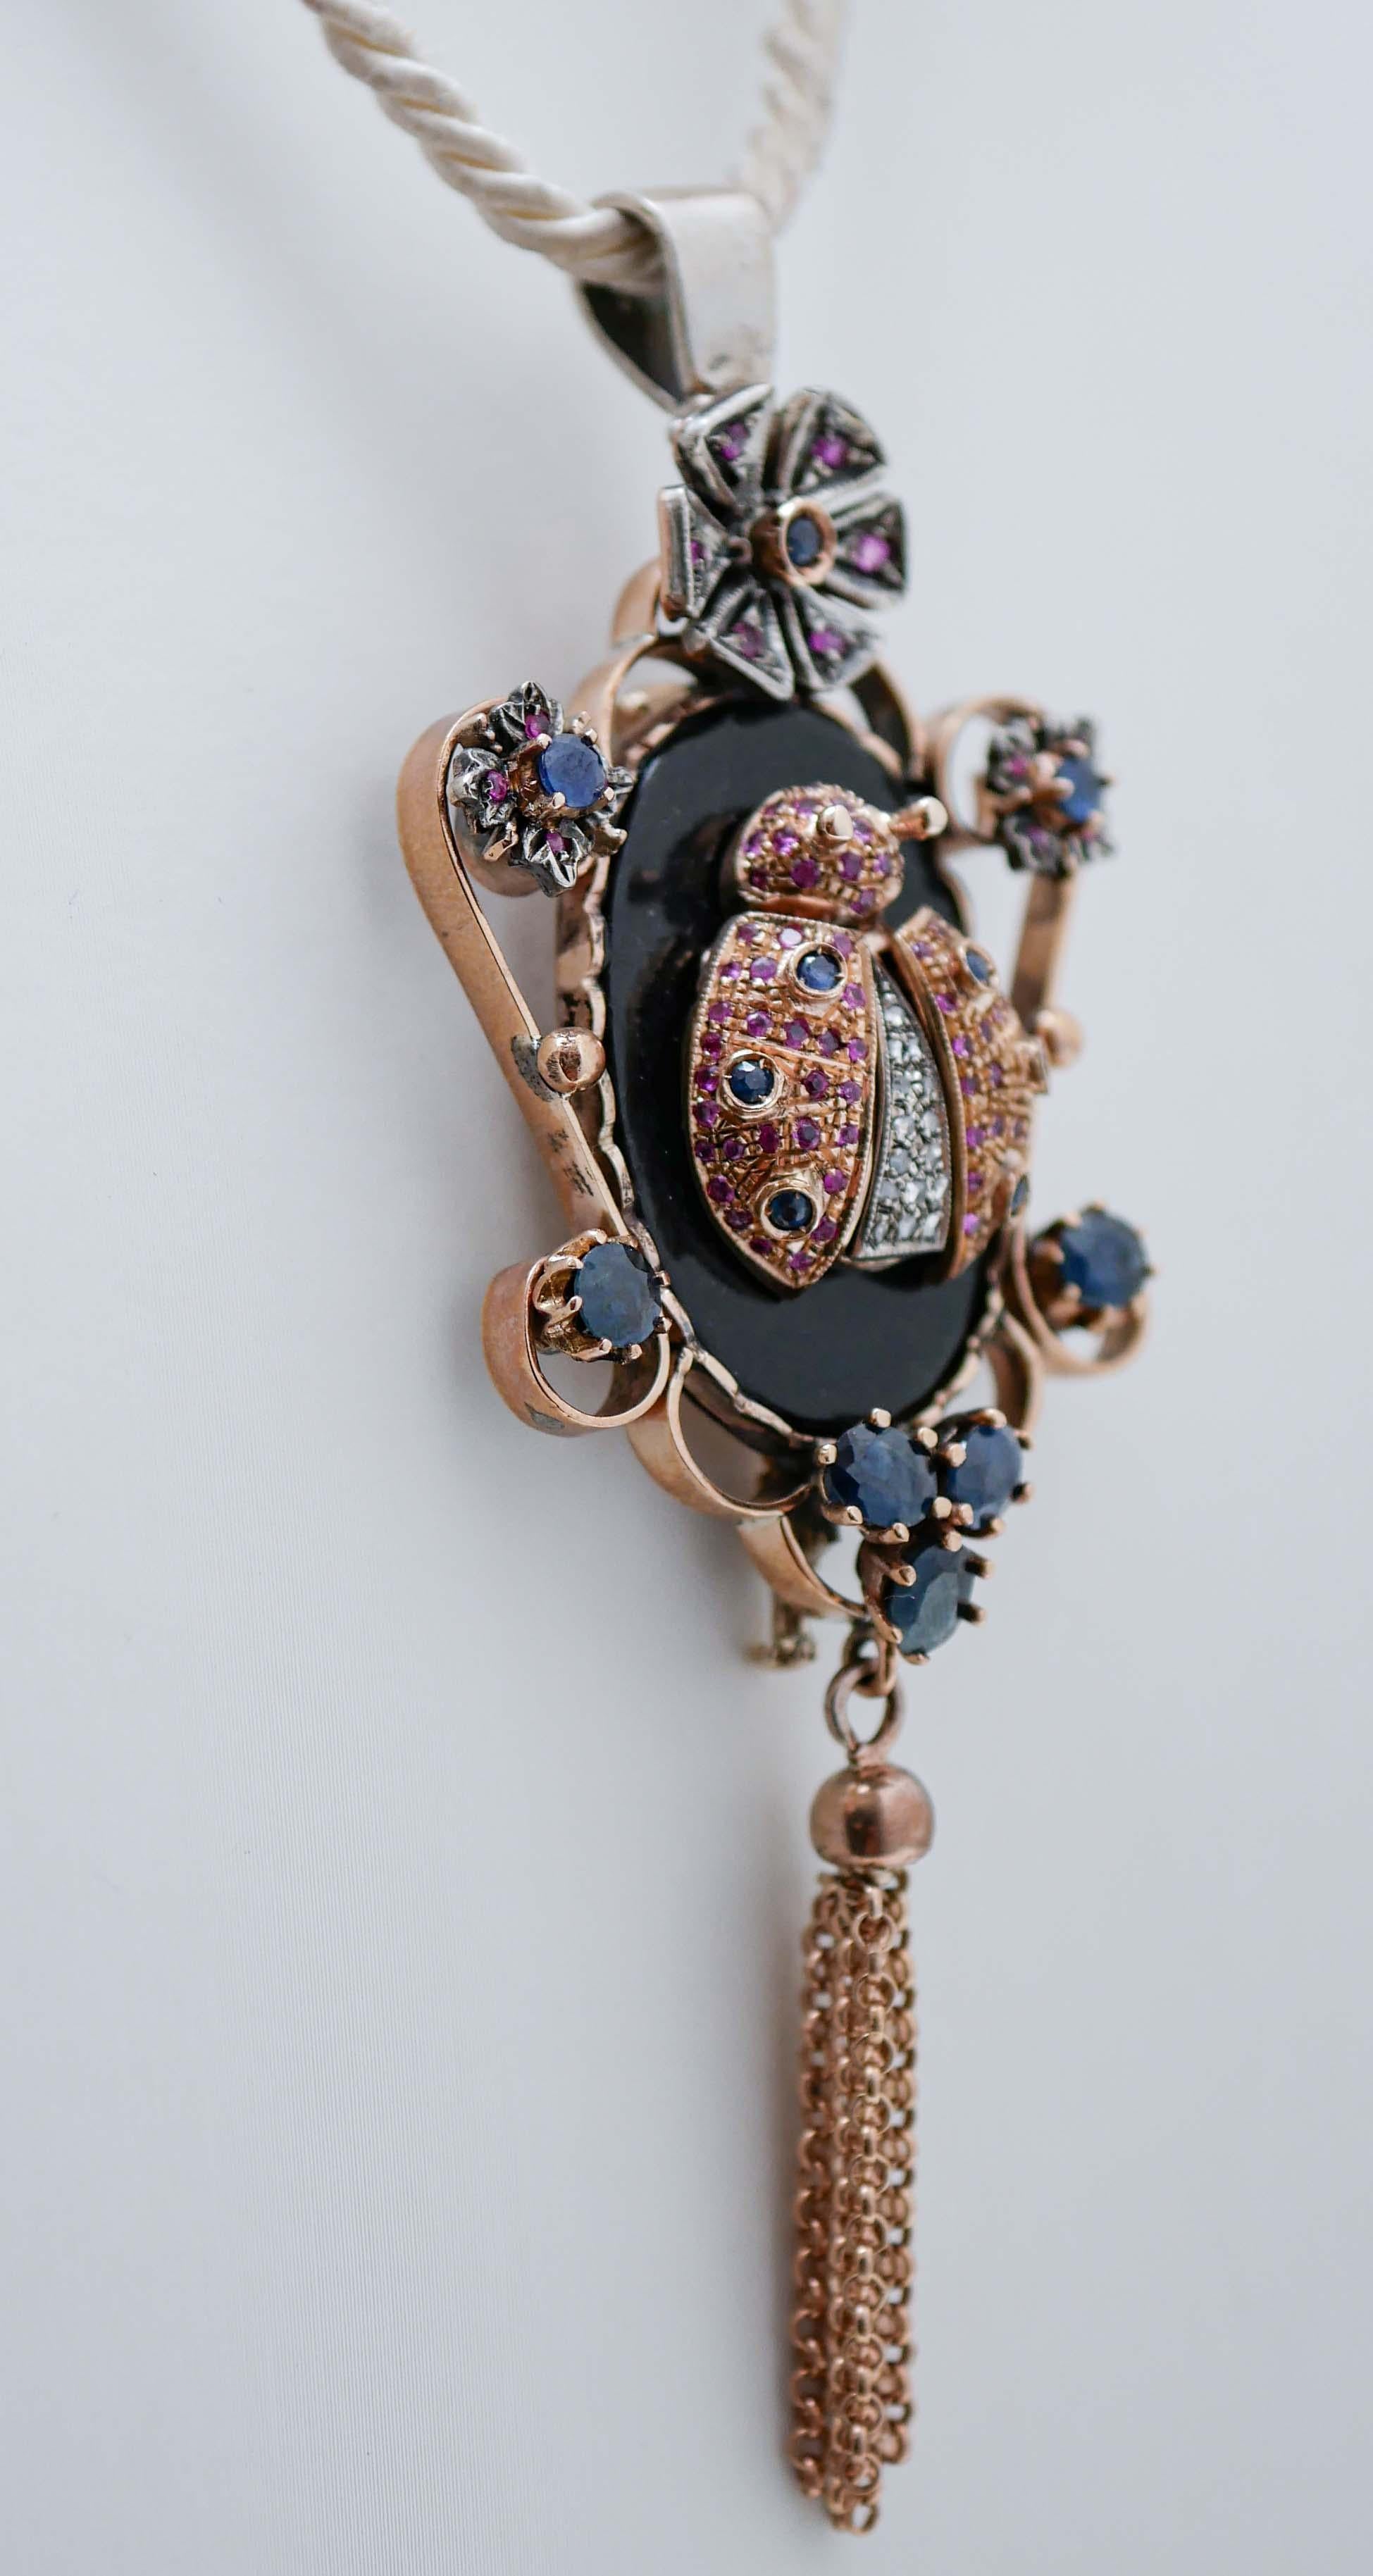 Retro Sapphires, Rubies, Diamonds, Onyx, Rose Gold and Silver Brooch/Pendant Necklace. For Sale